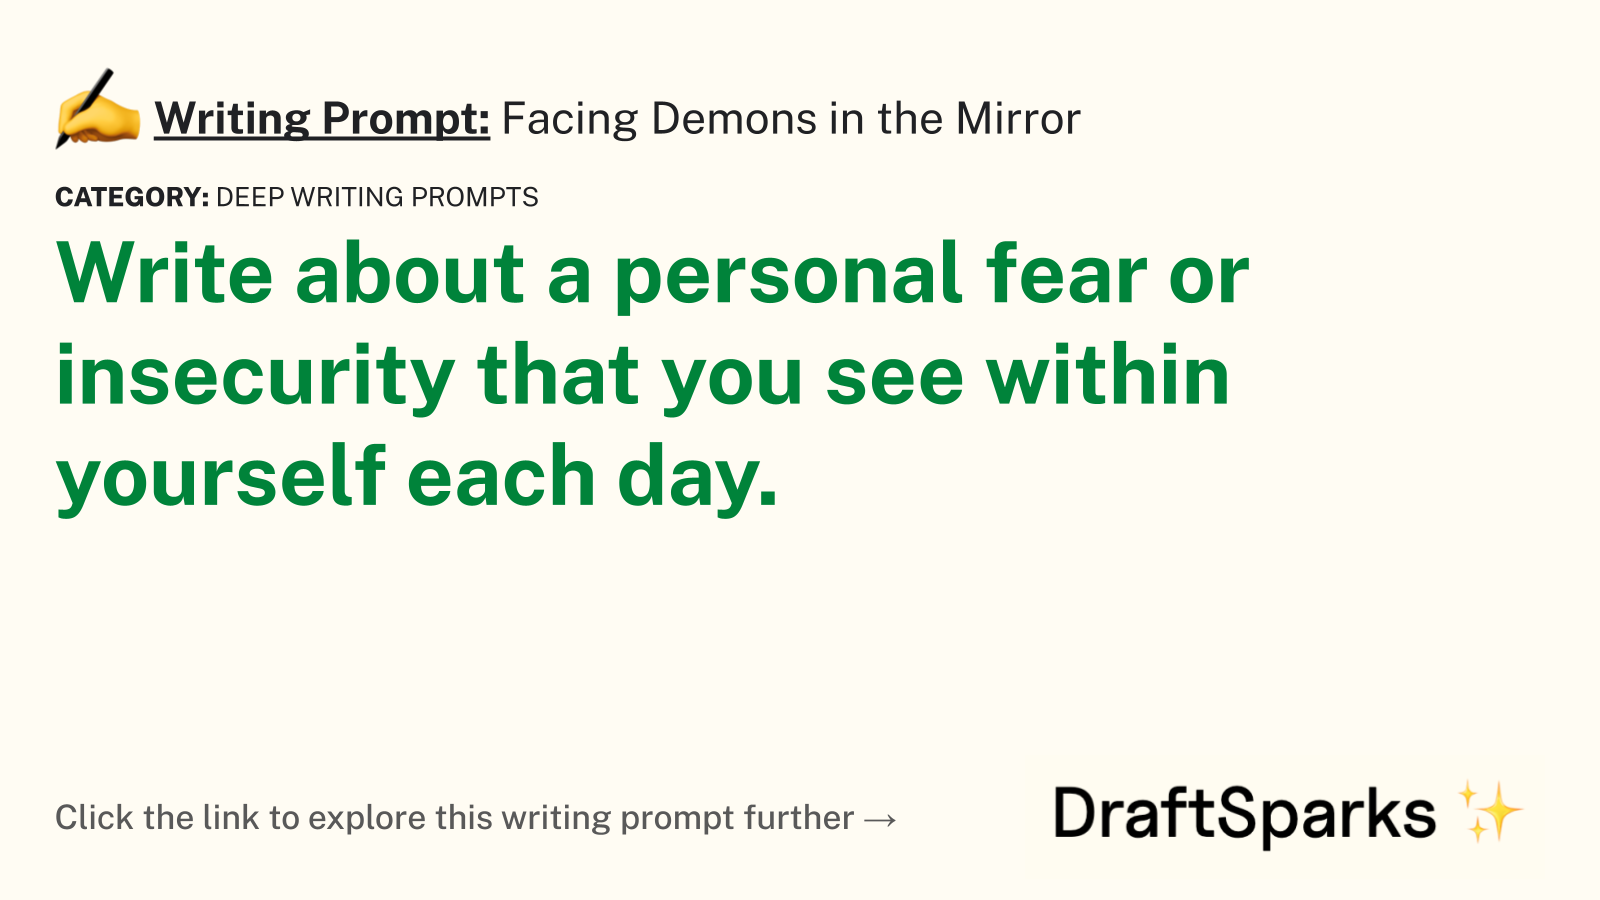 Facing Demons in the Mirror